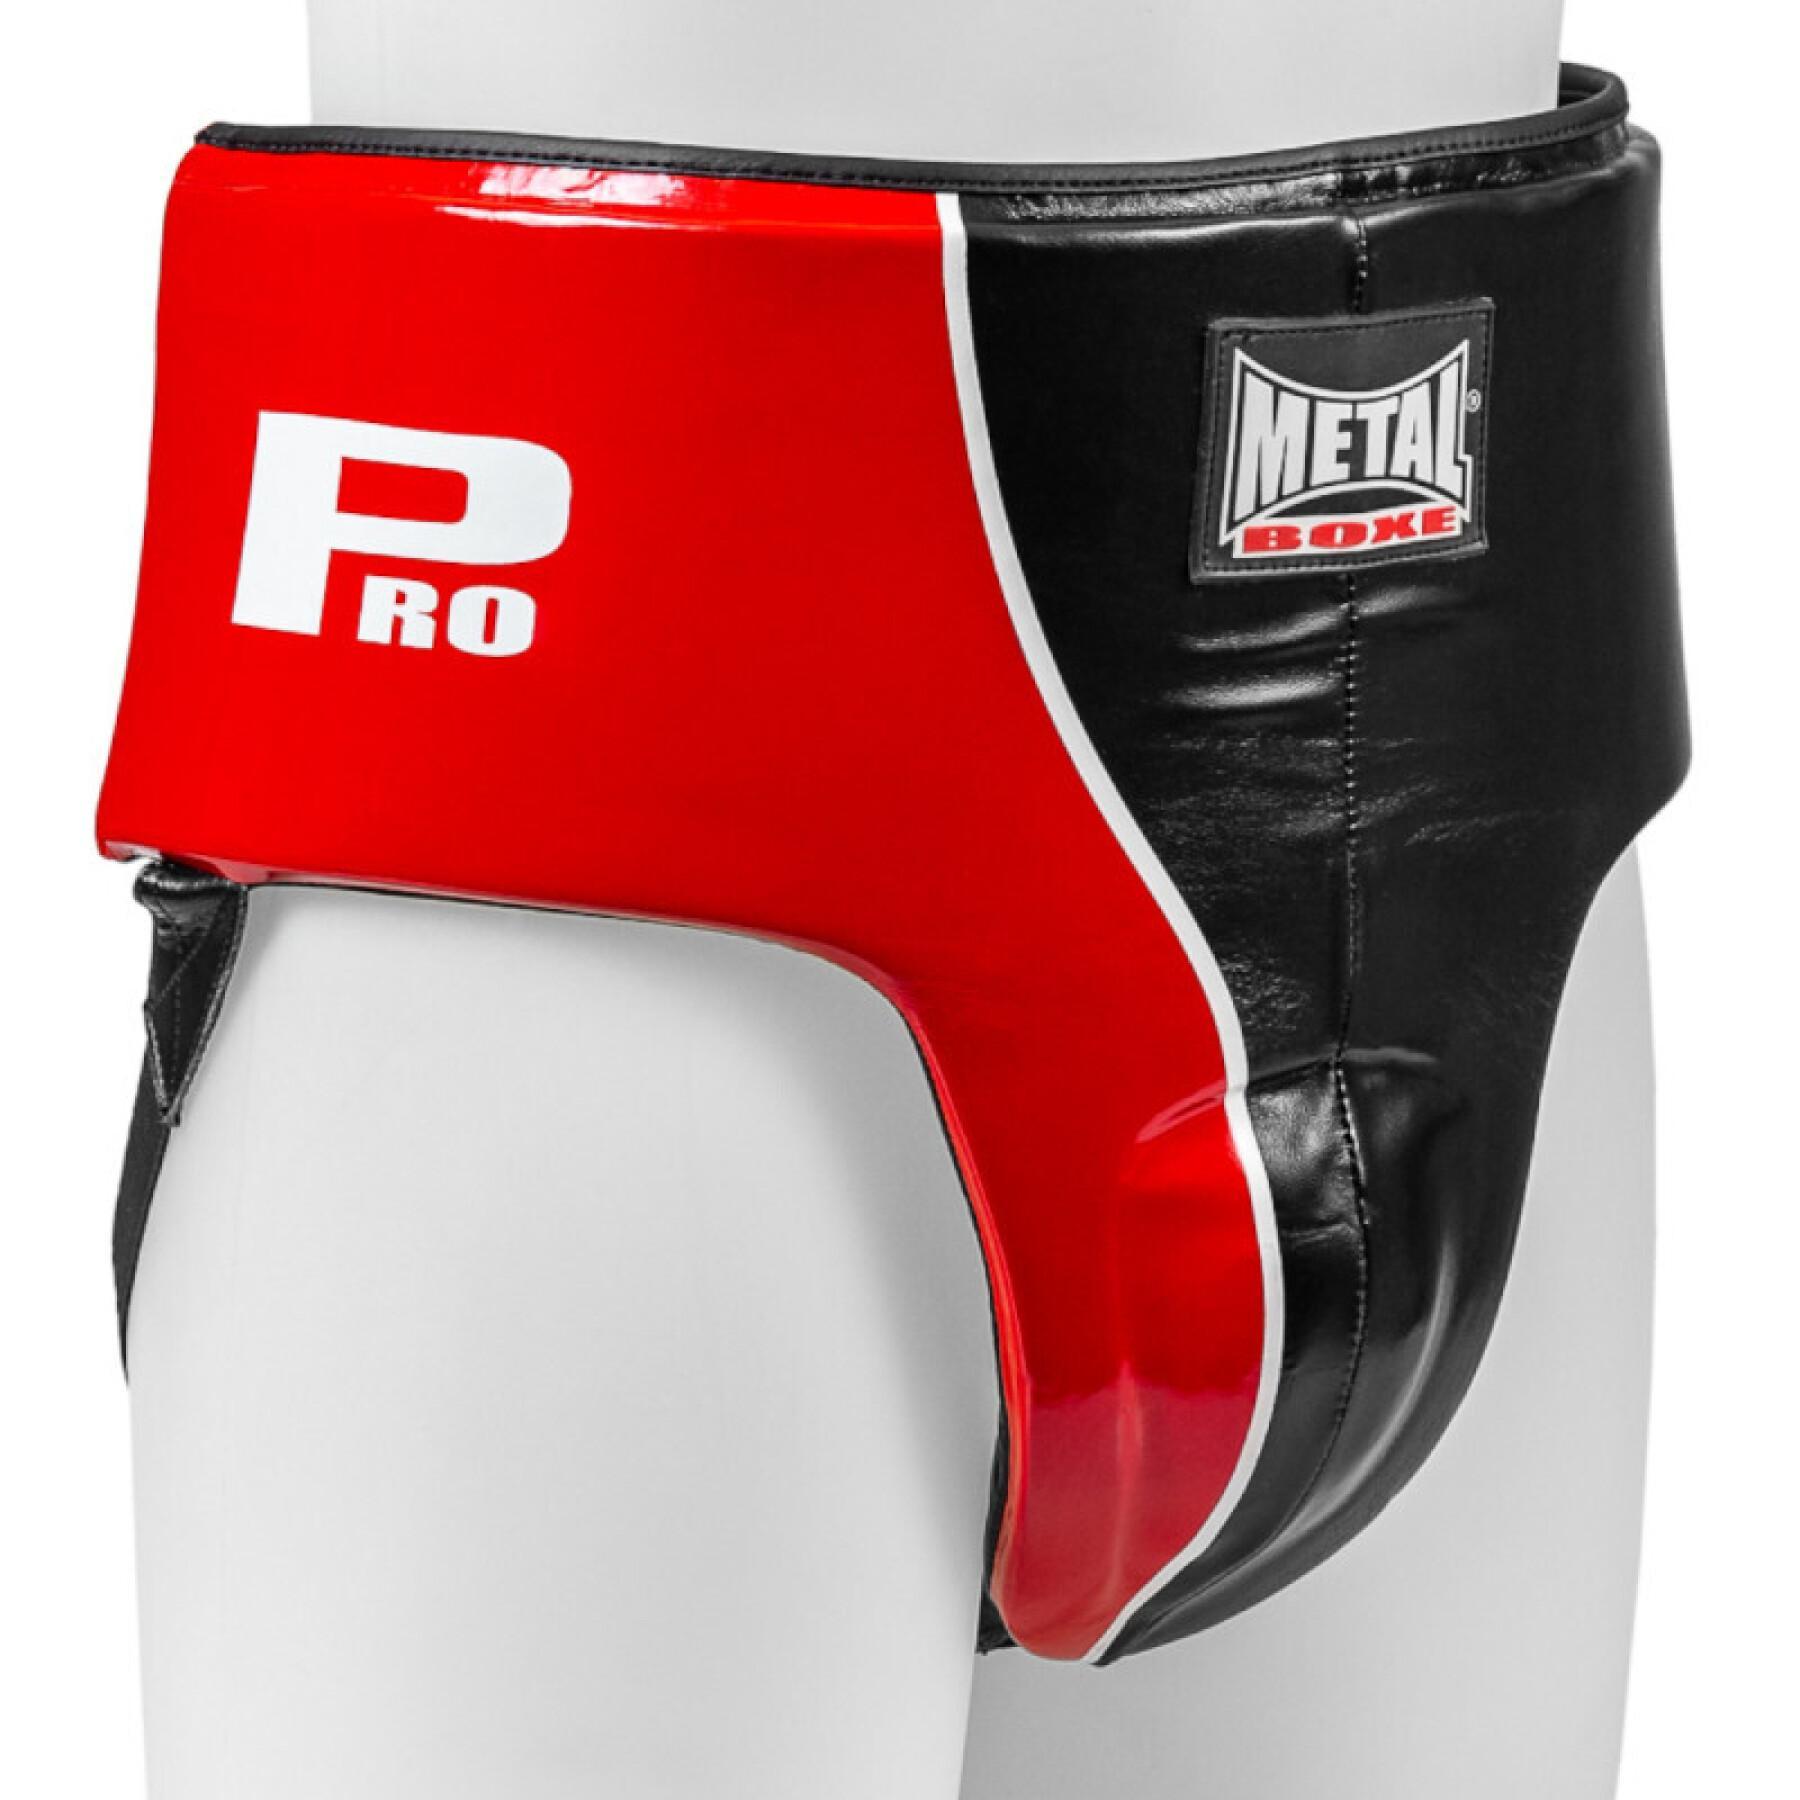 Coquille professionnelle Metal Boxe Club Line